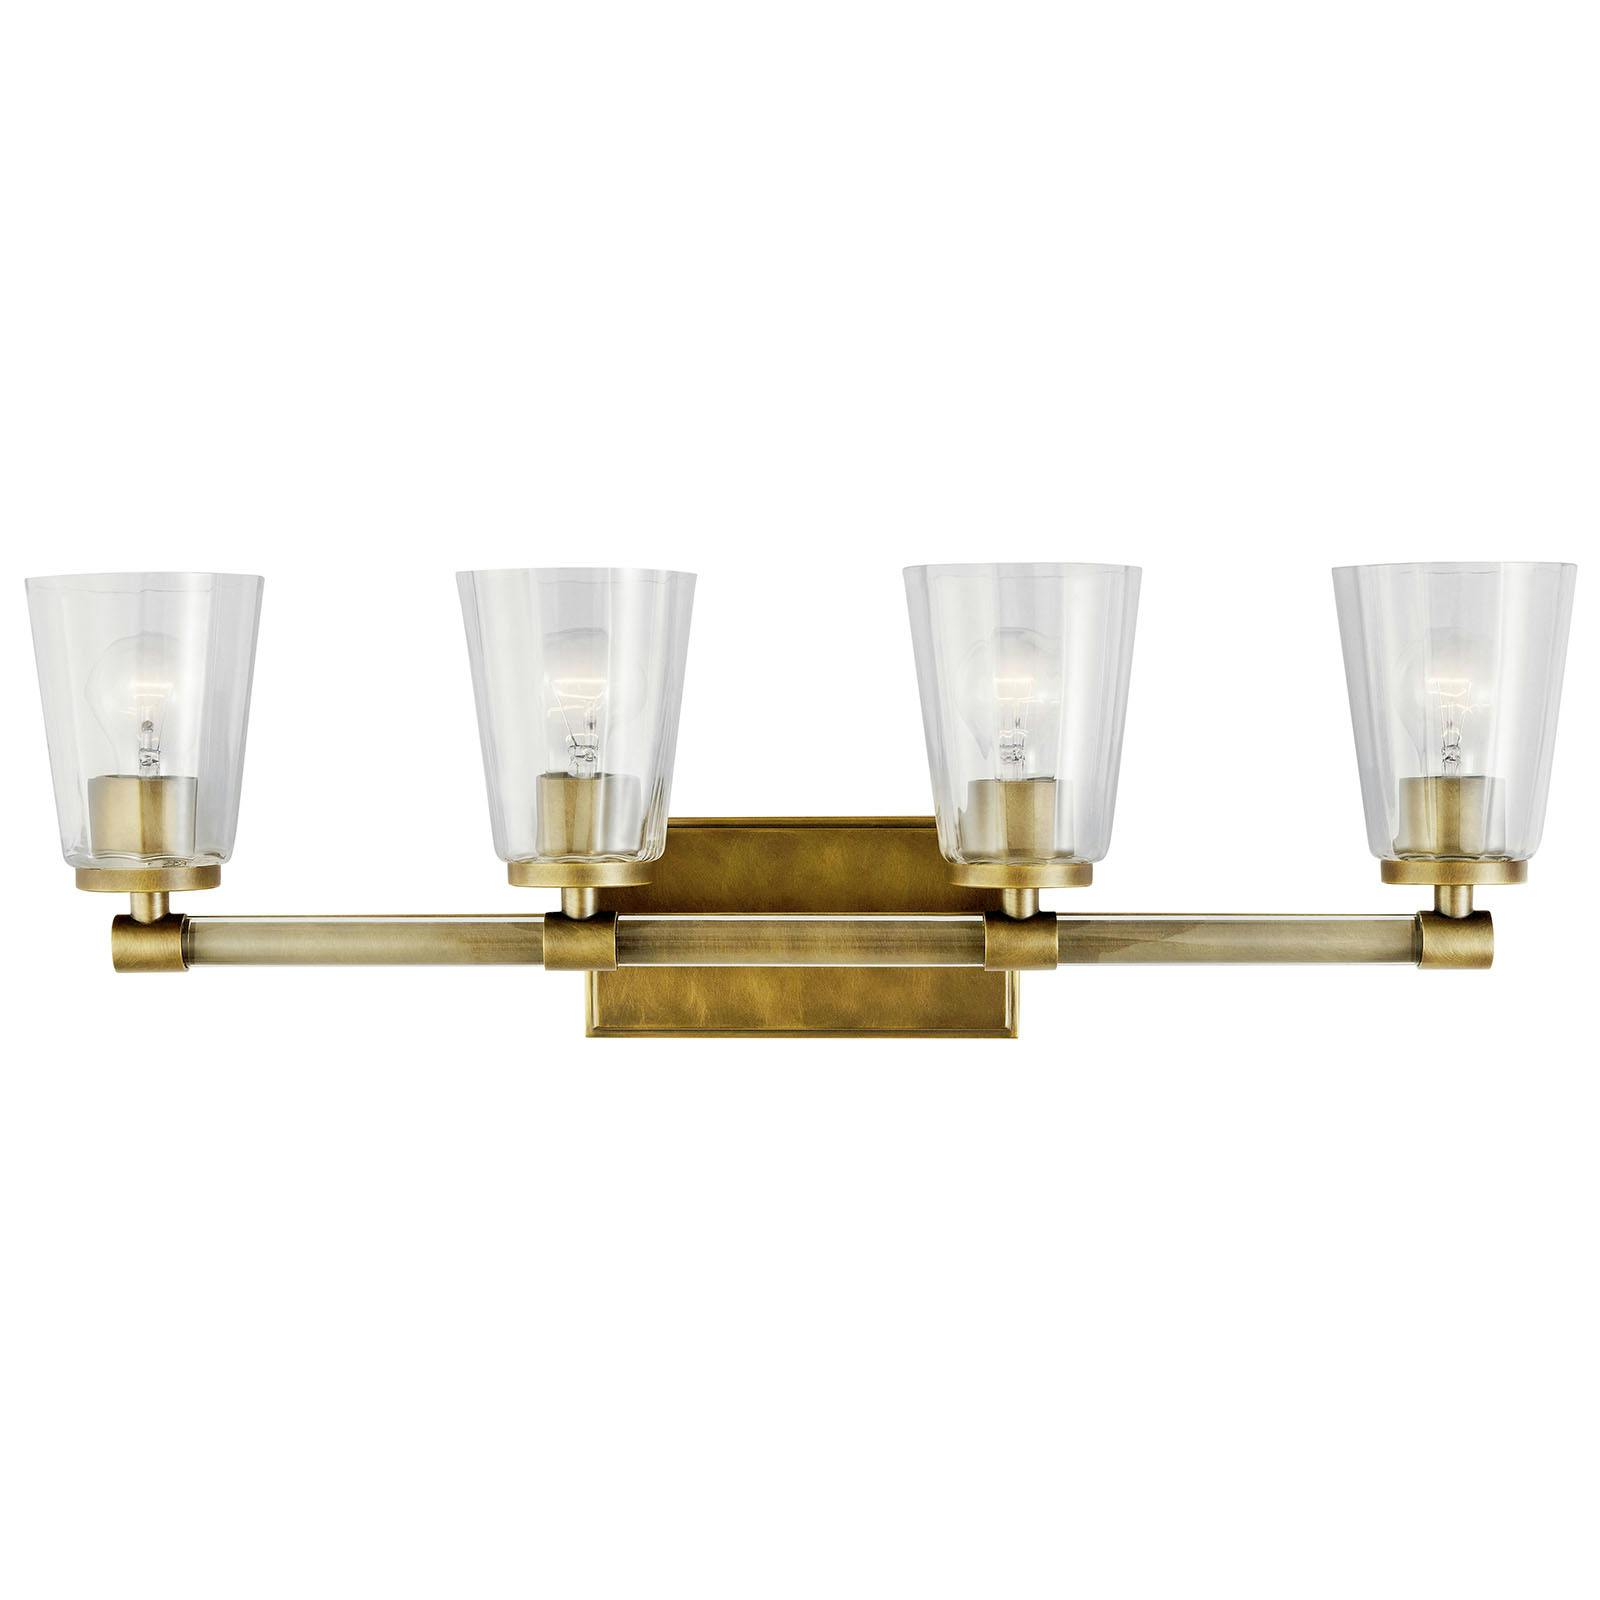 The Audrea 4 Light Vanity Light Natural Brass facing up on a white background